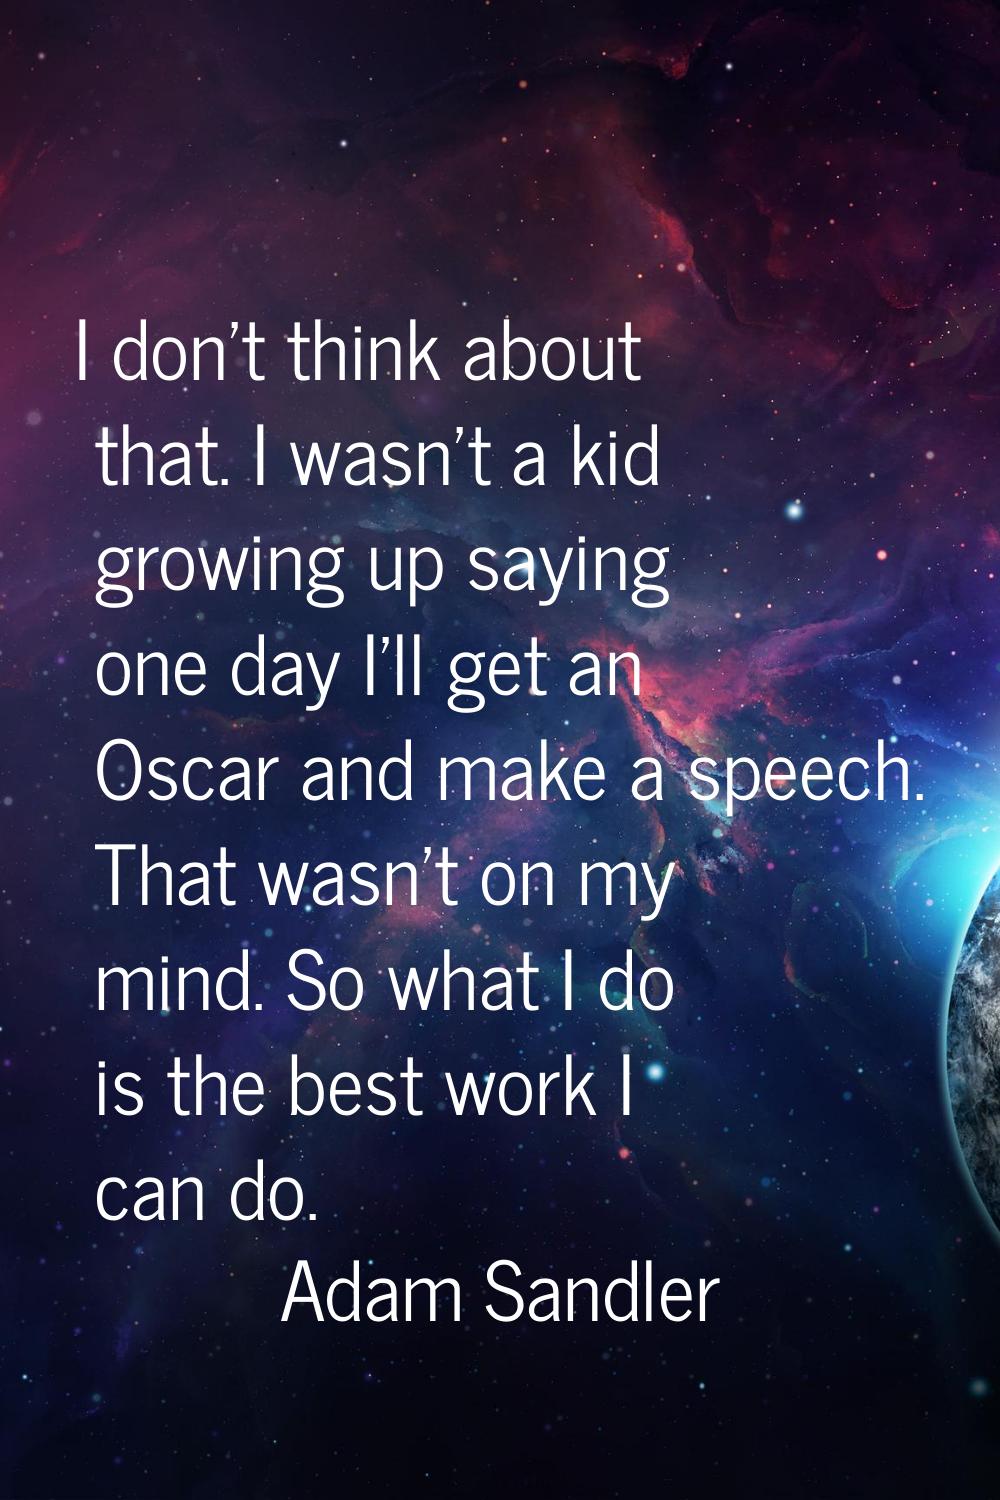 I don't think about that. I wasn't a kid growing up saying one day I'll get an Oscar and make a spe